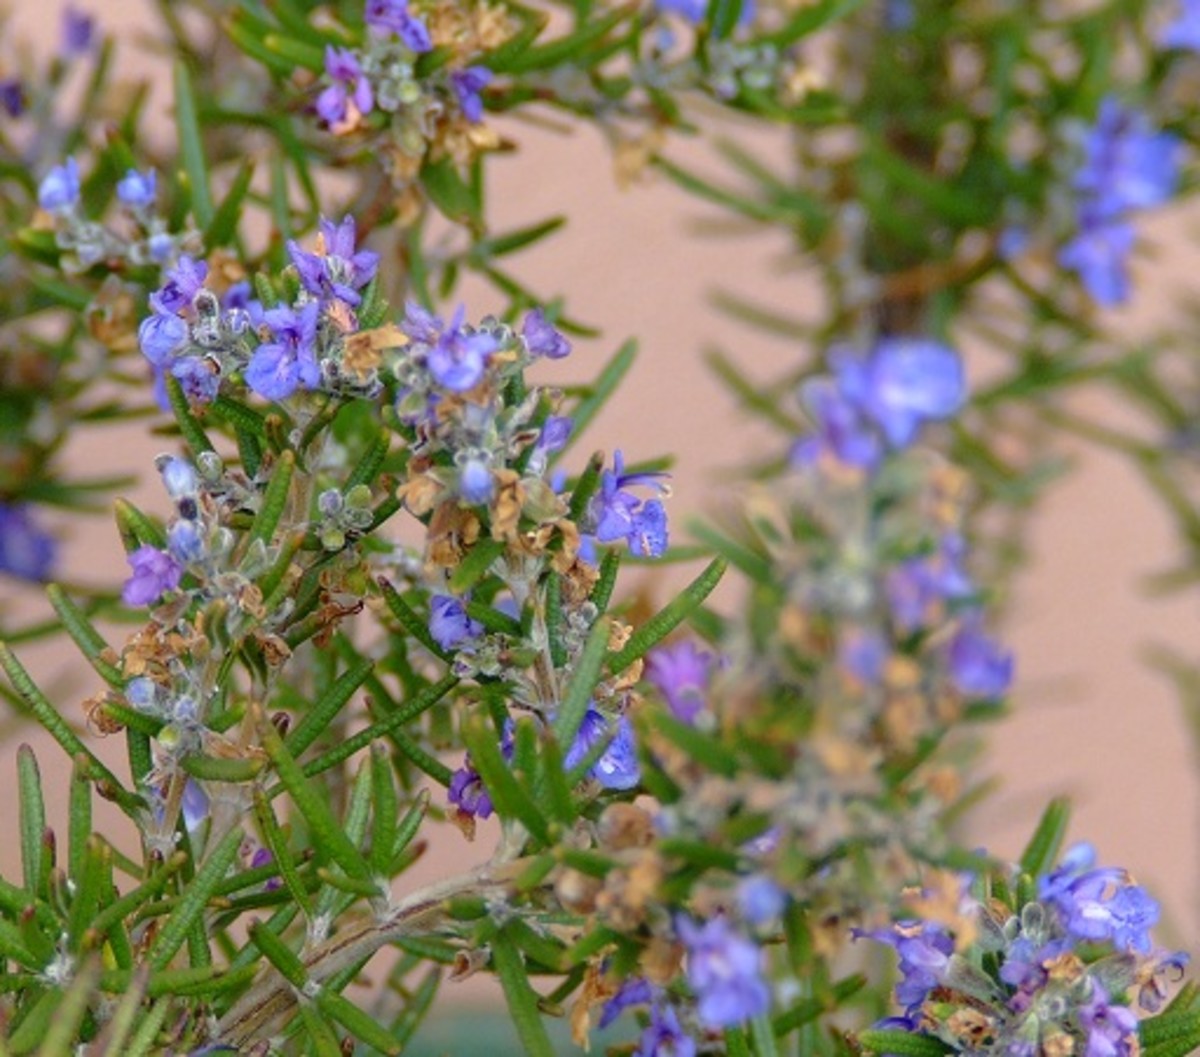 Rosemary is great for natural pest control—plant around your veggie garden or scatter the leaves around plants that insects are attacking. 